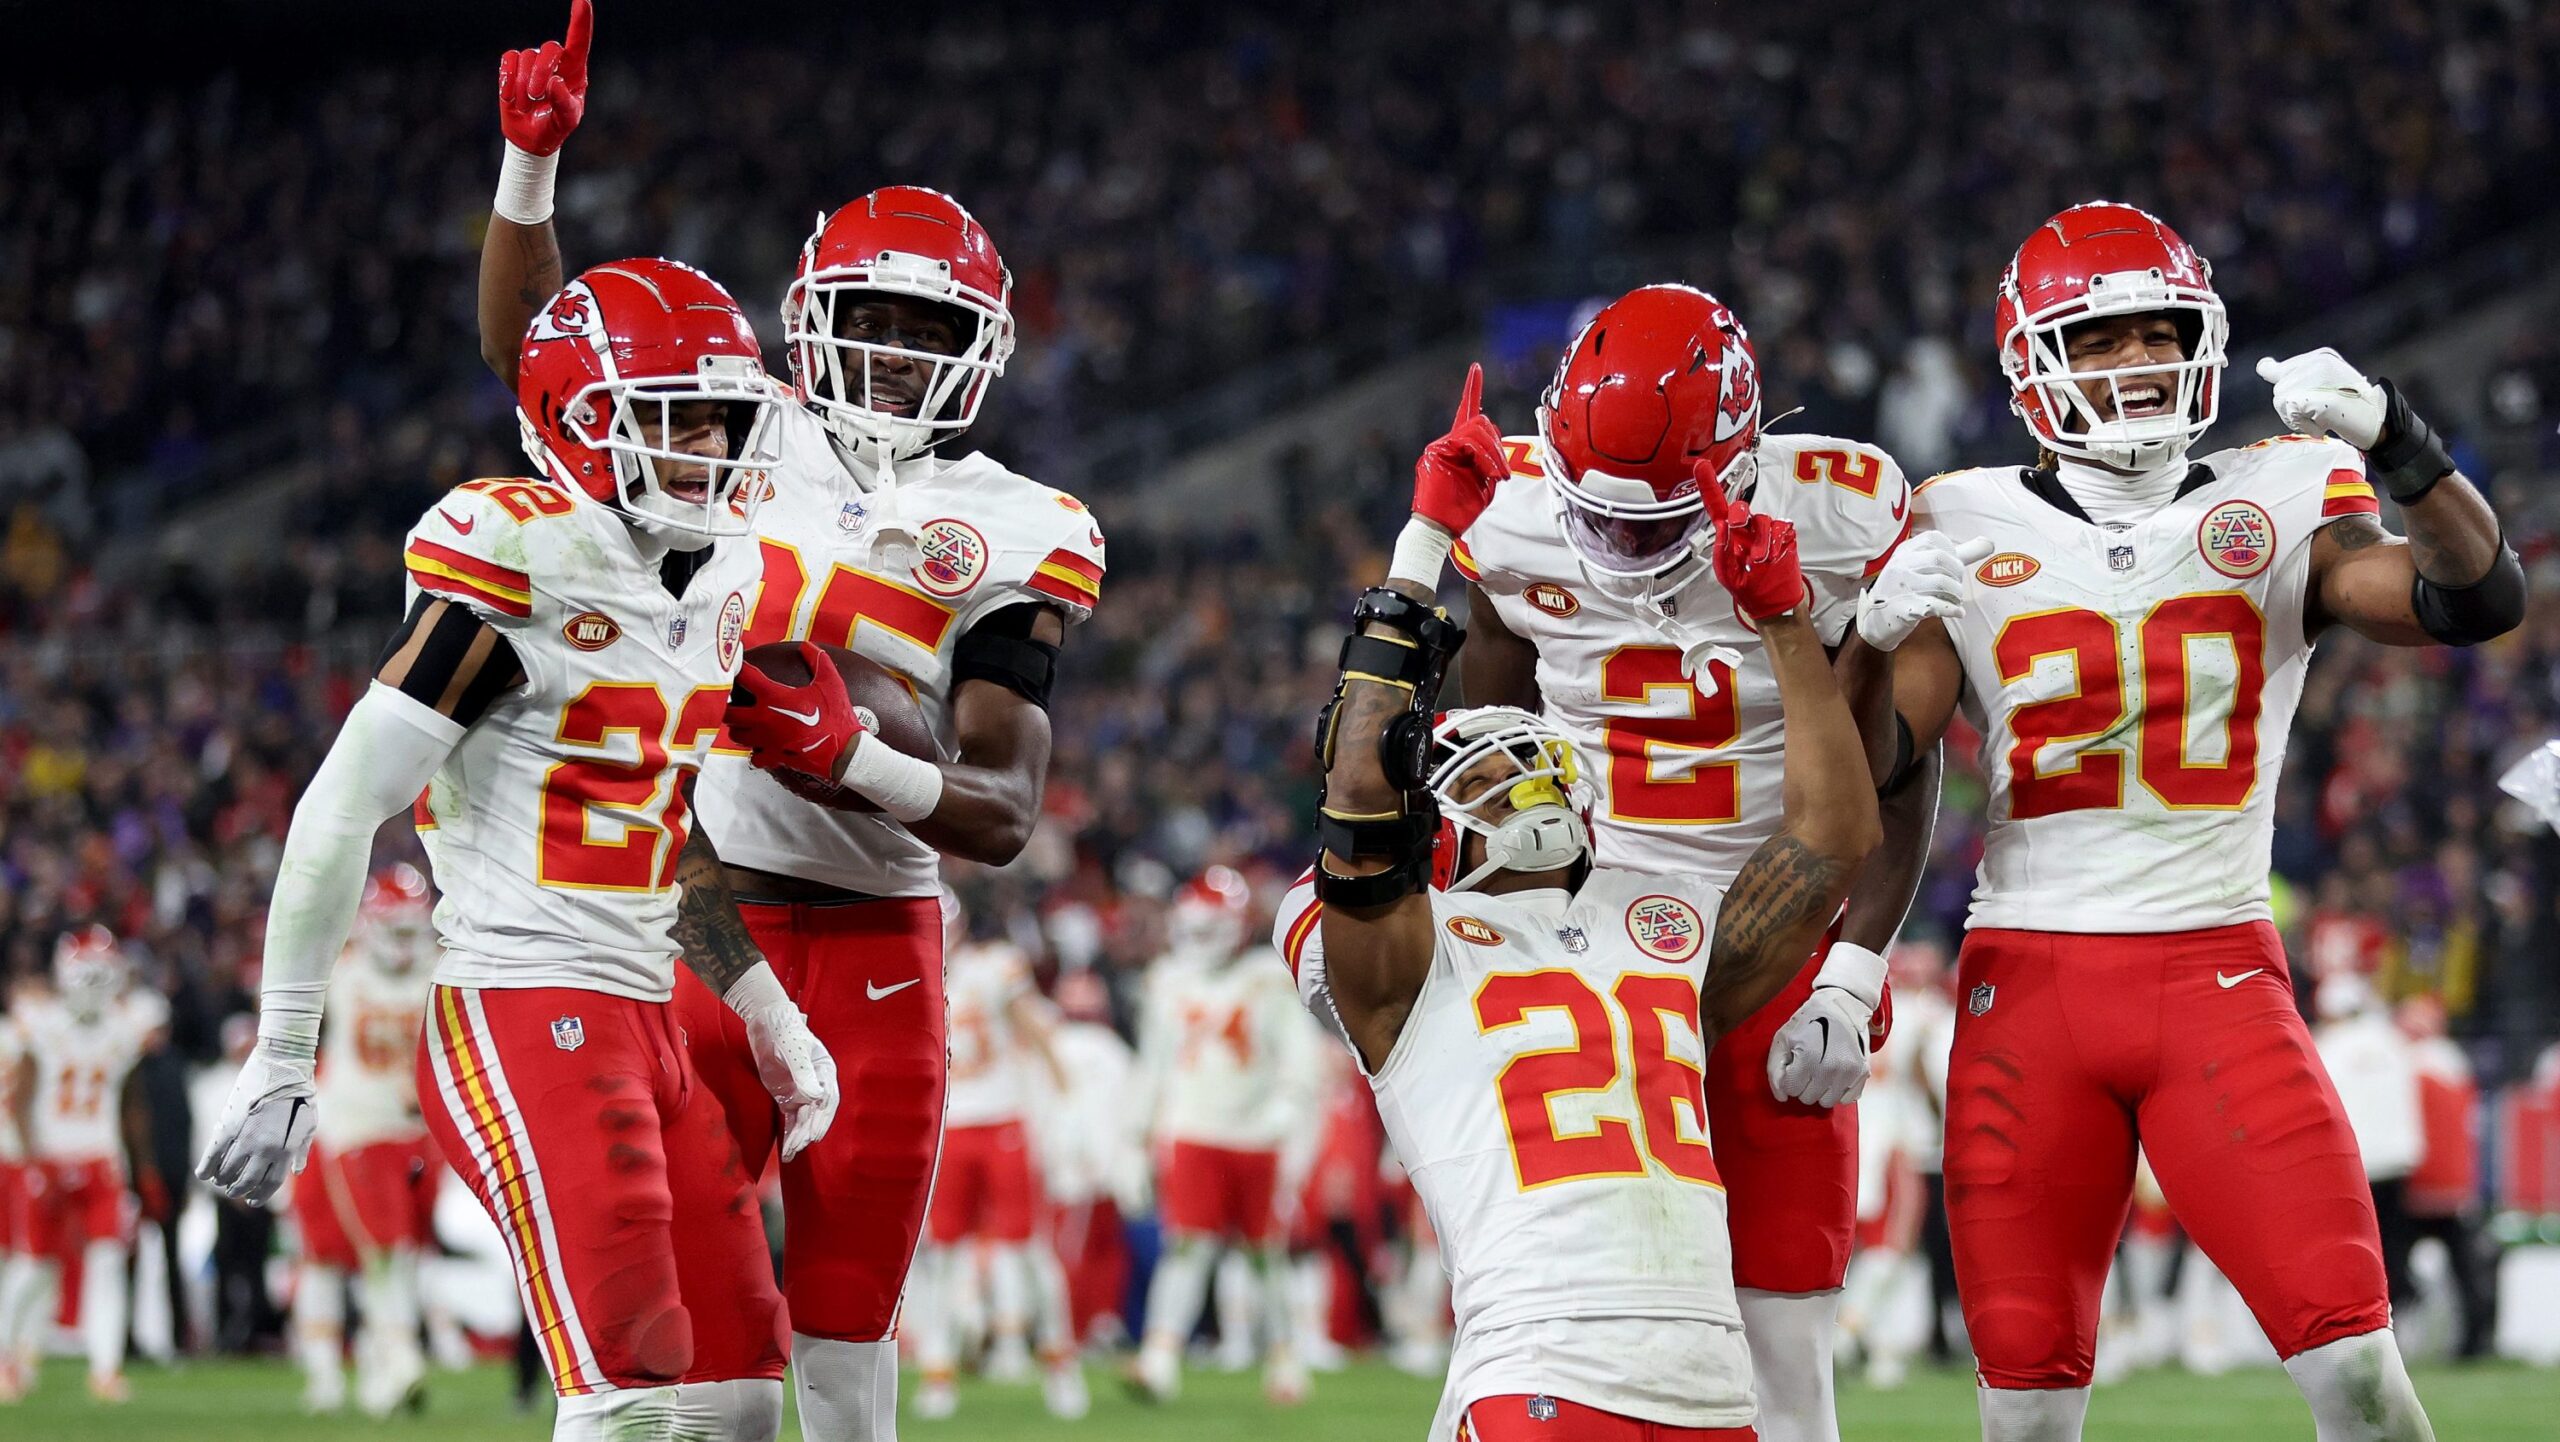 Kansas City’s Defense Did The Real Work